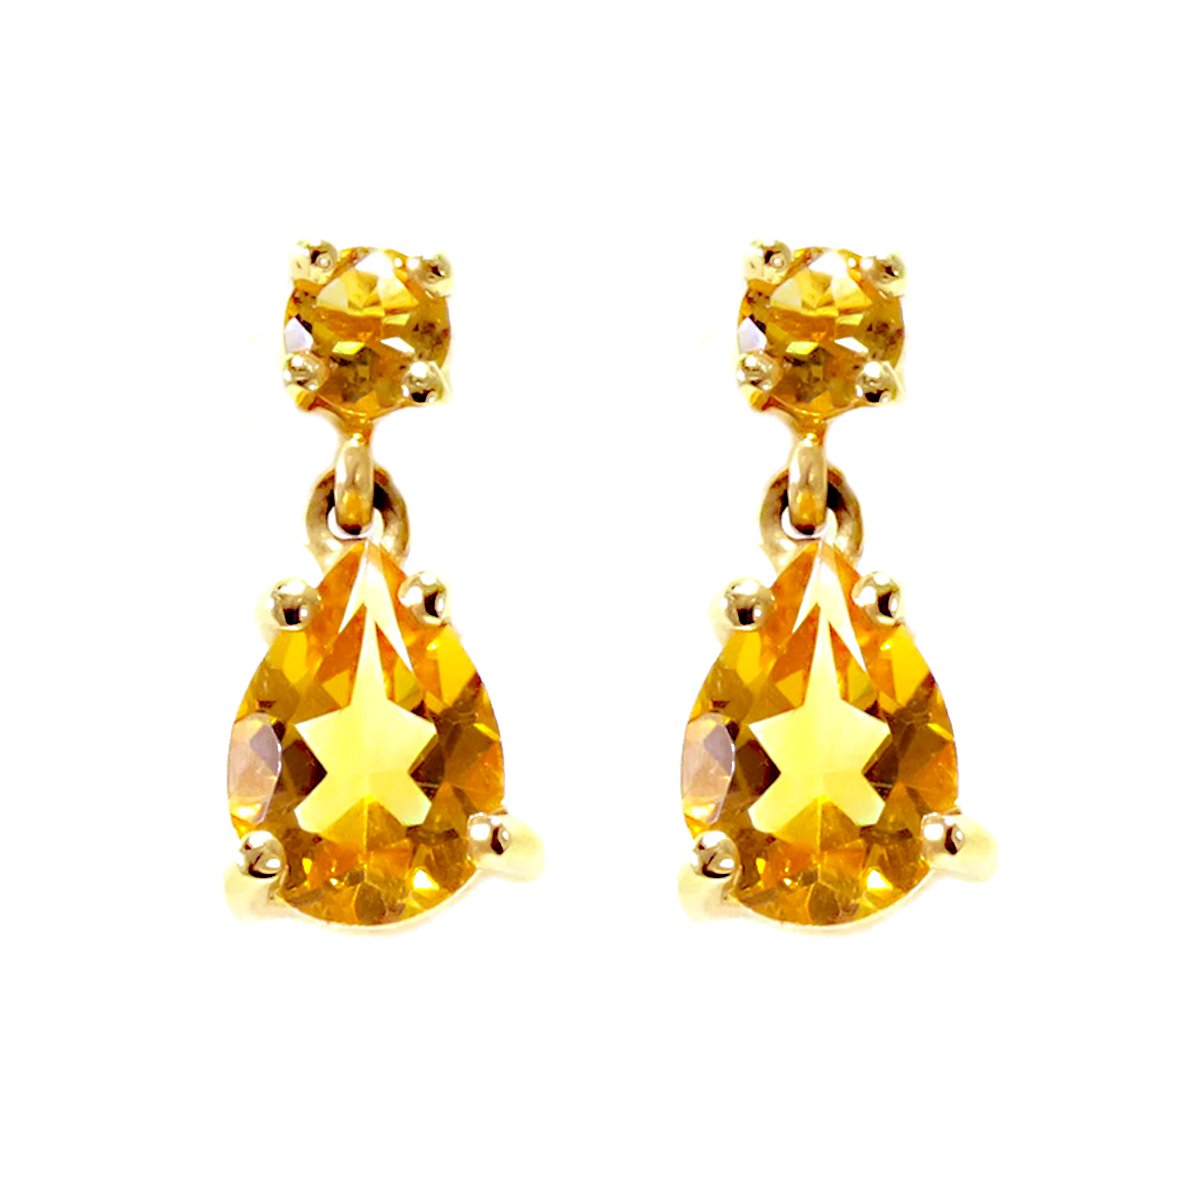 SPECIAL ORDER - 14K Yellow Gold Pear Shape Citrine Earrings